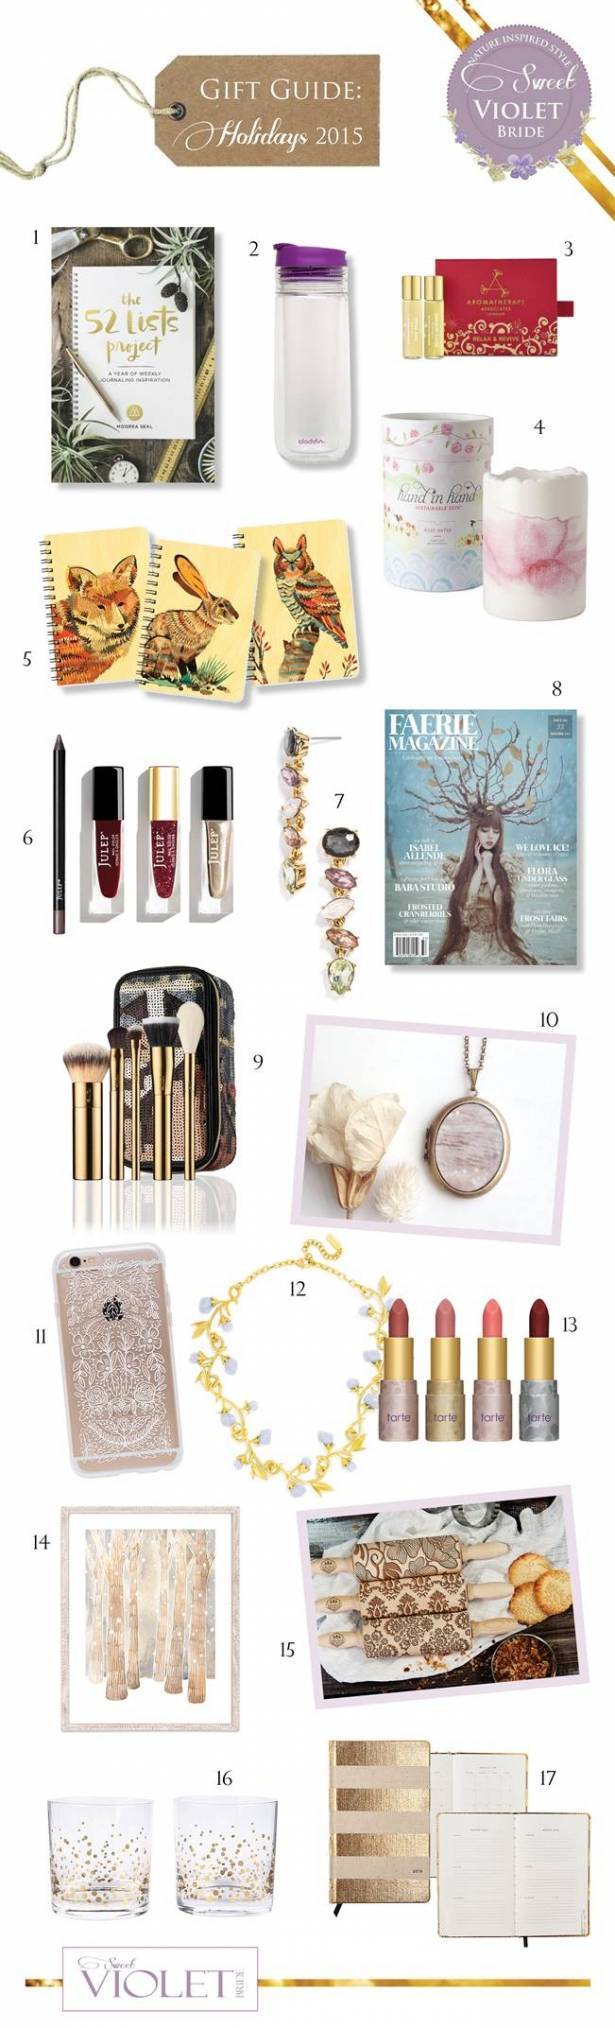 Favorite Things: Holiday Gift Guide 2015 3